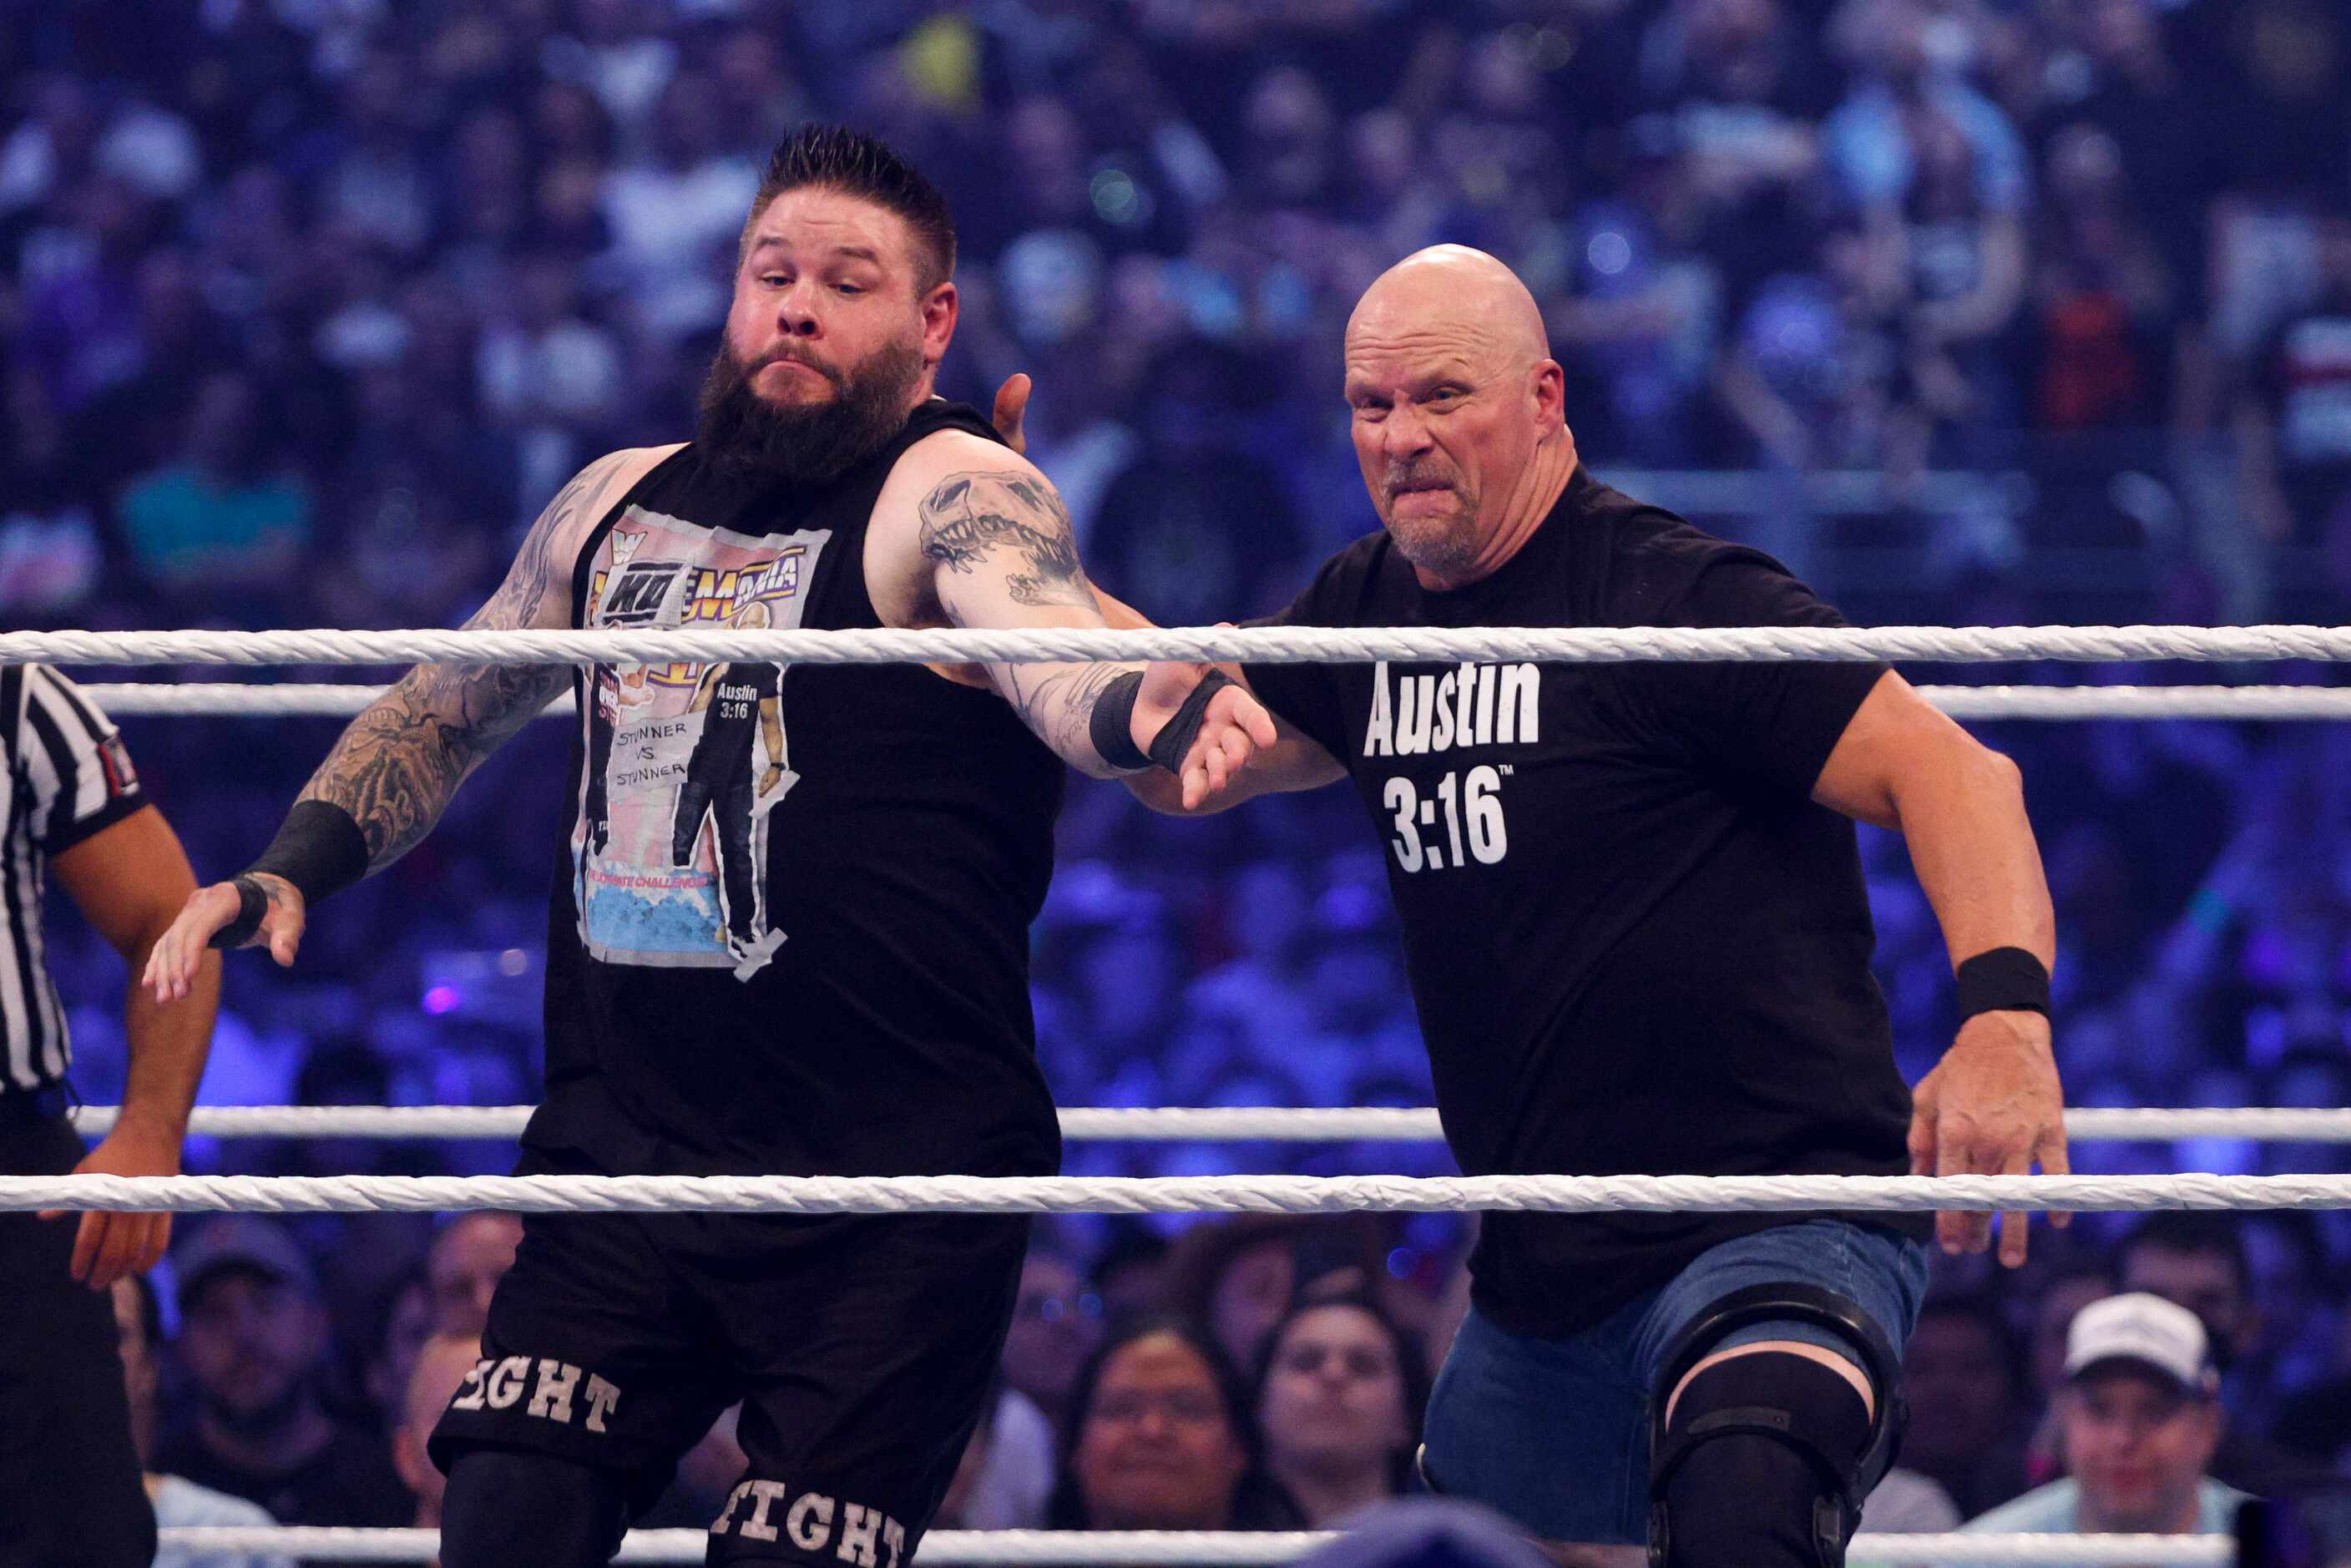 “Stone Cold” Steve Austin throws Kevin Owens into the ropes during a match at WrestleMania...